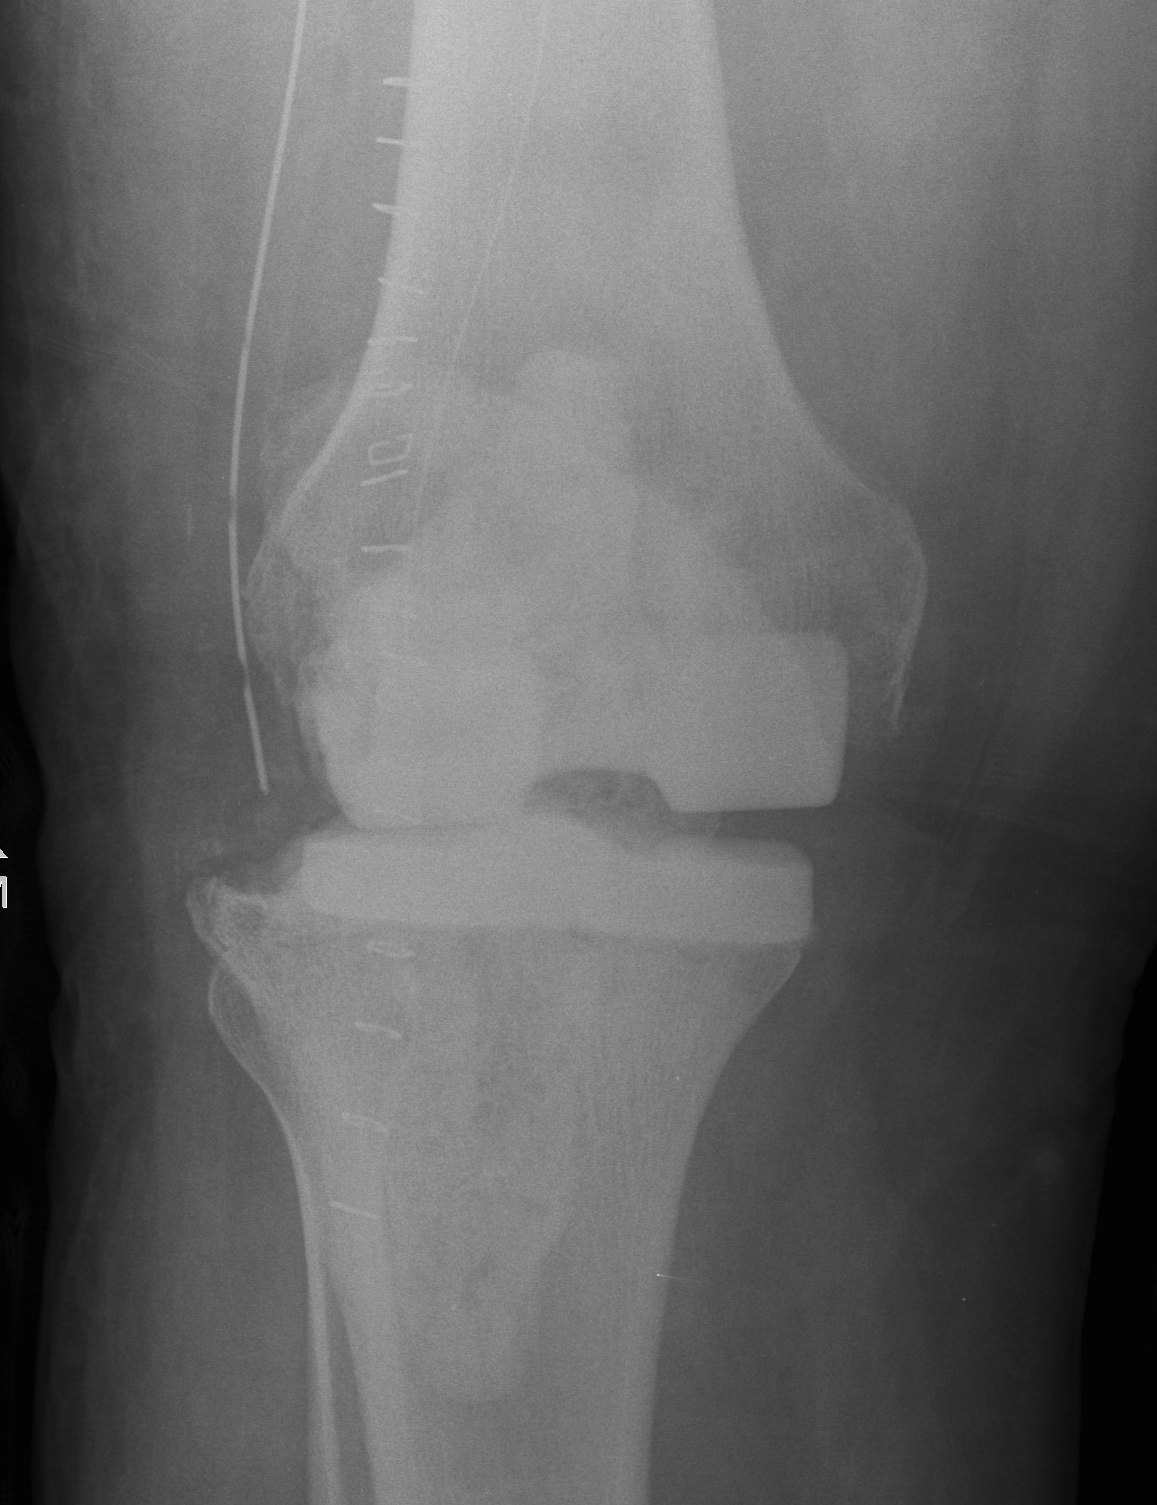 Infected TKR Cement Femur and Tibia AP